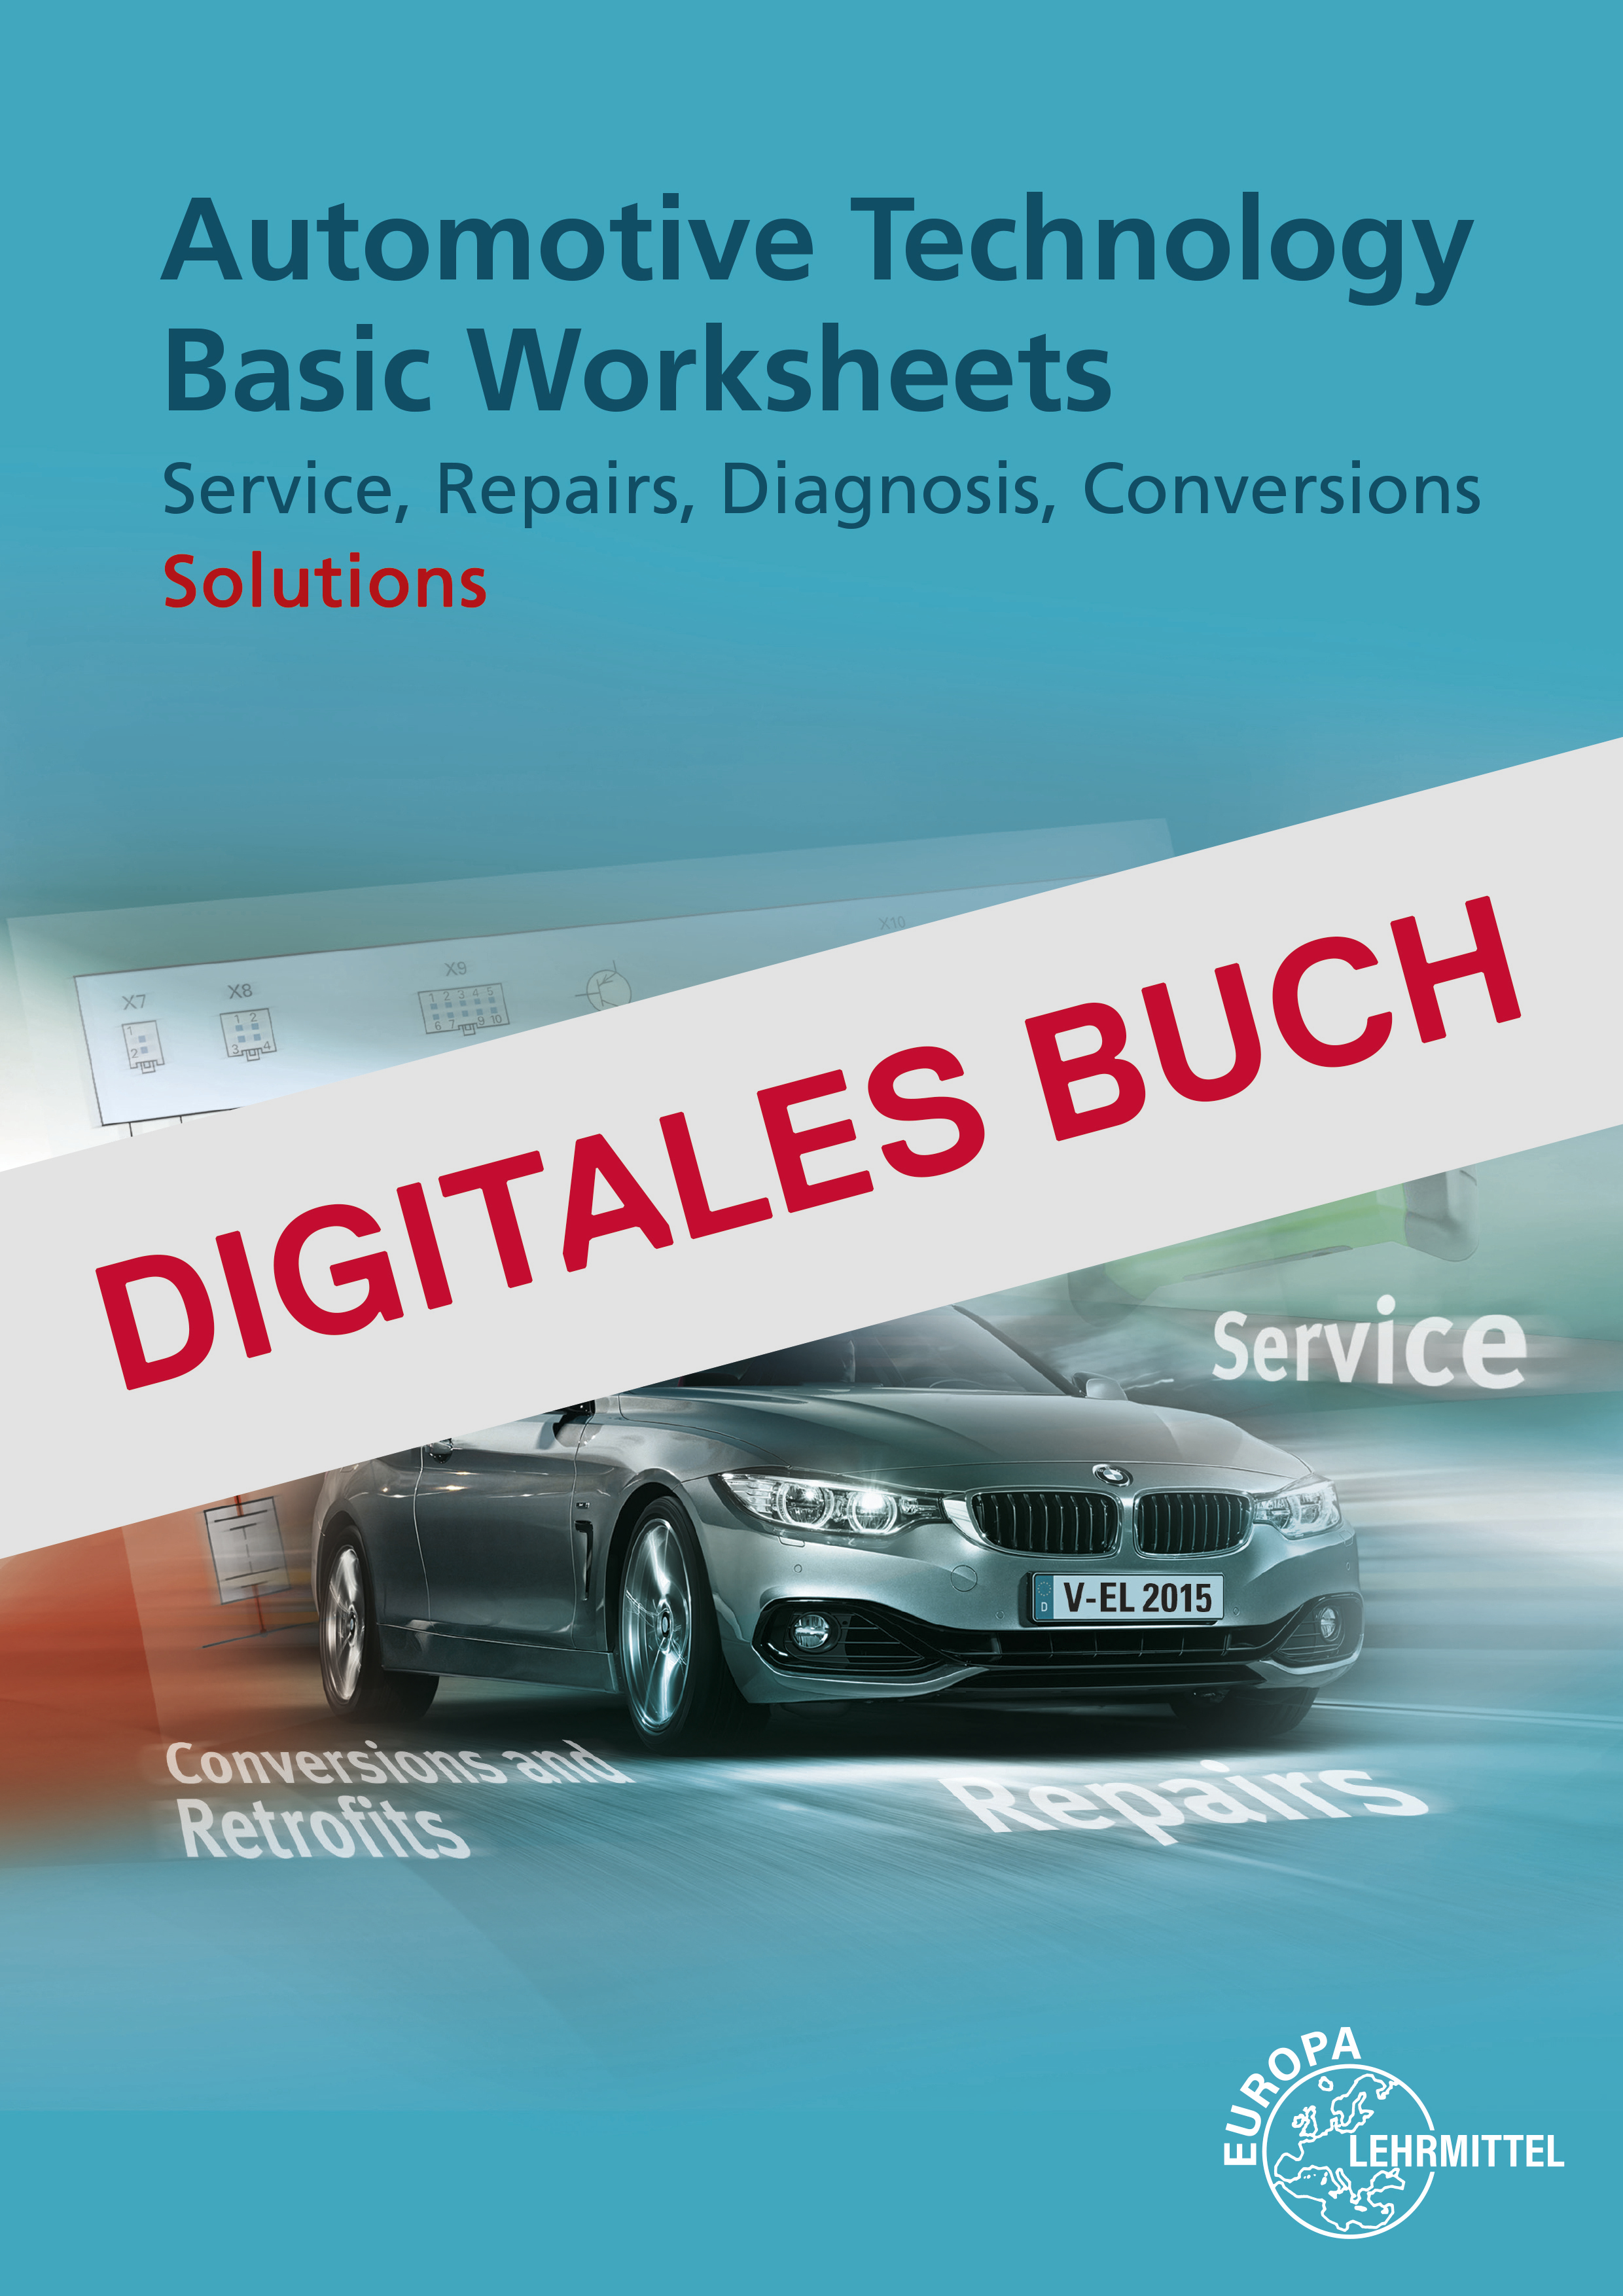 Automotive Technology Basic Worksheets Solutions - Digitales Buch